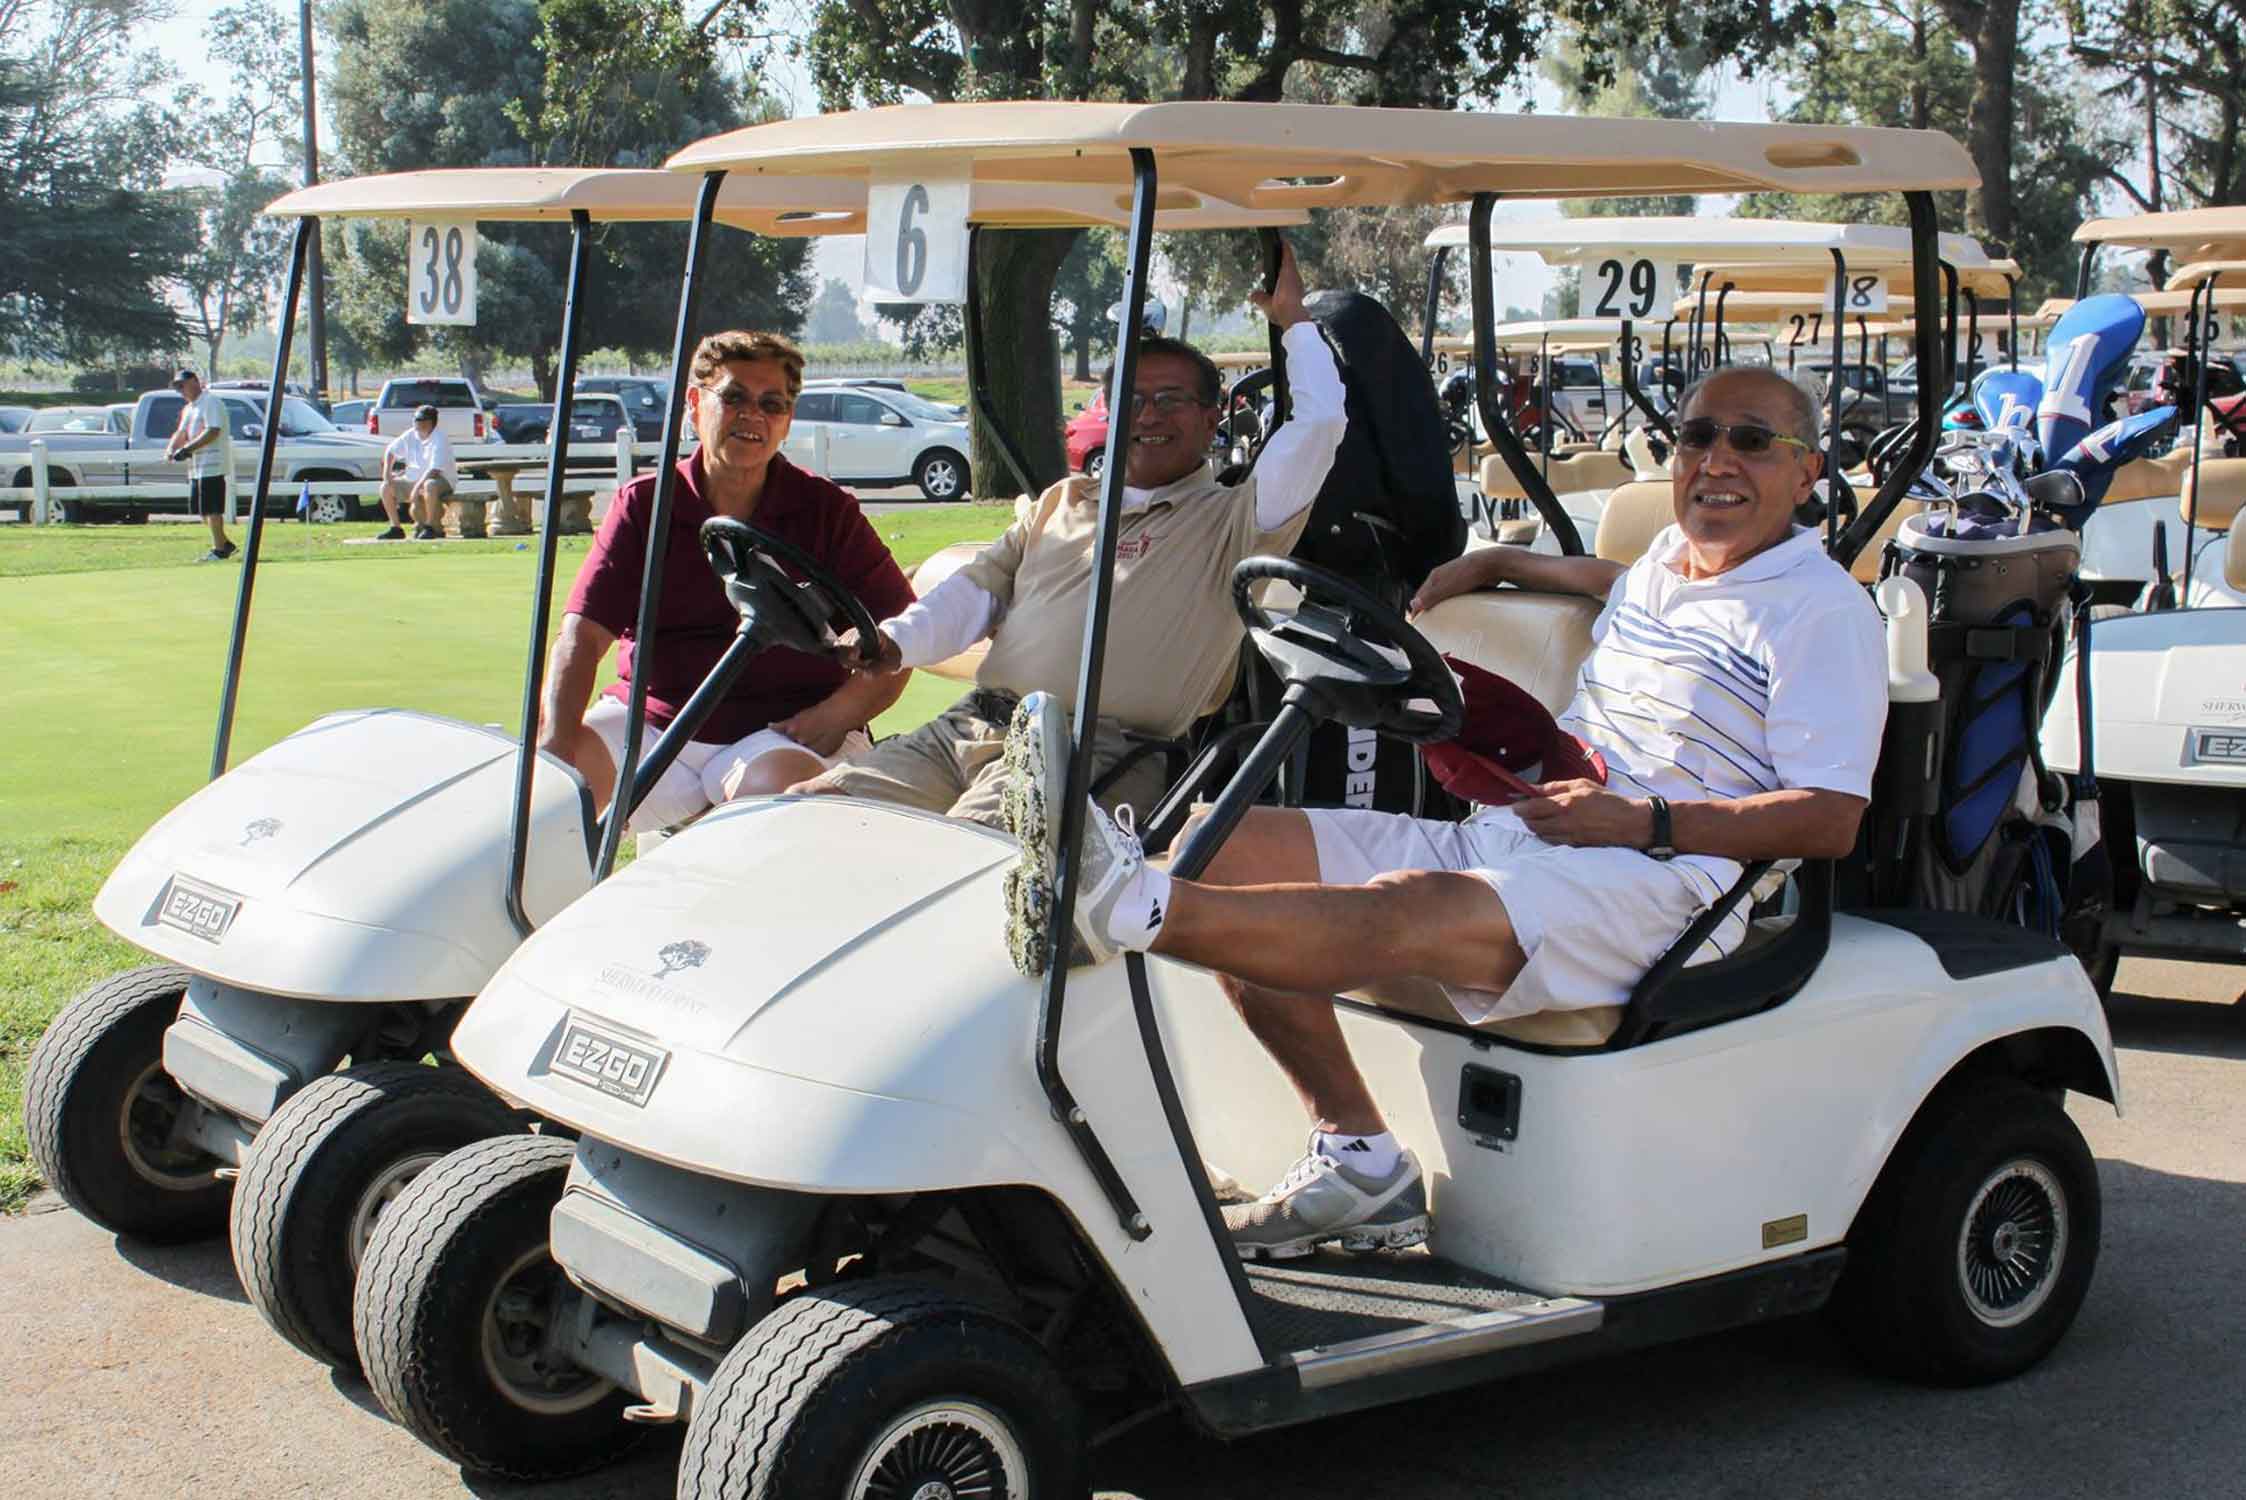 Men sitting in golf carts and smiling.